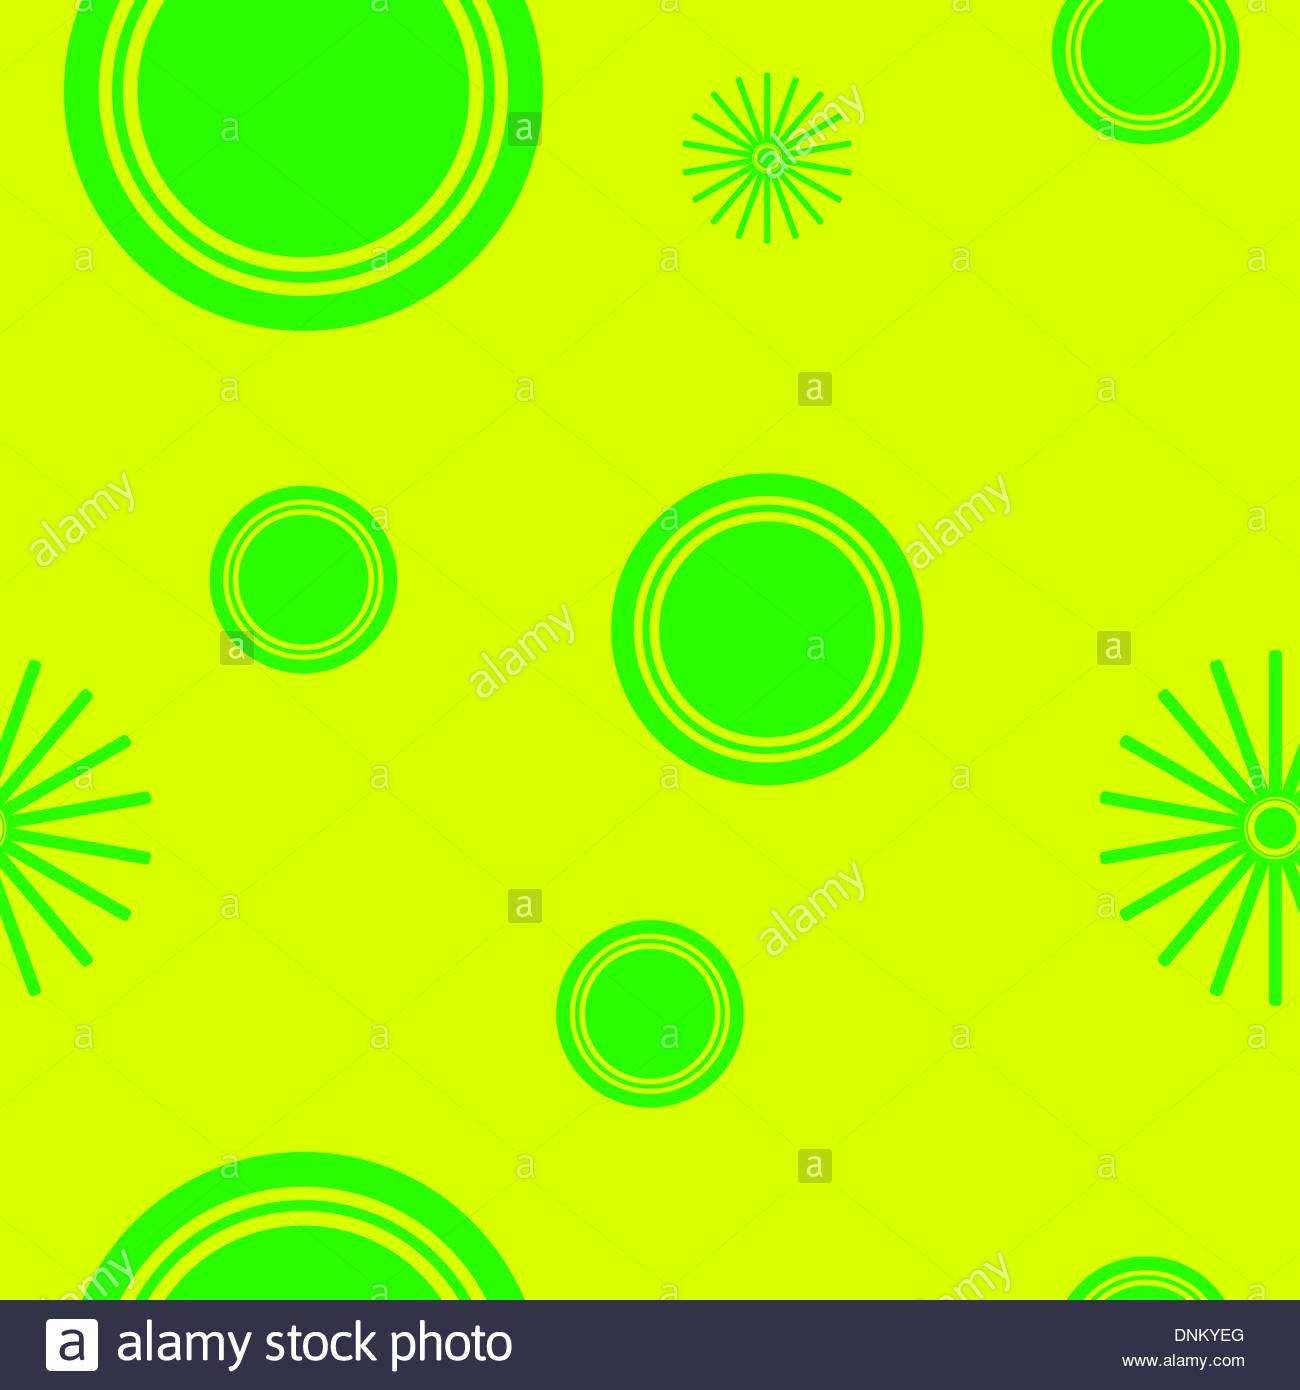 Seamless Wallpaper From Abstract Smooth Forms Stock Vector Art